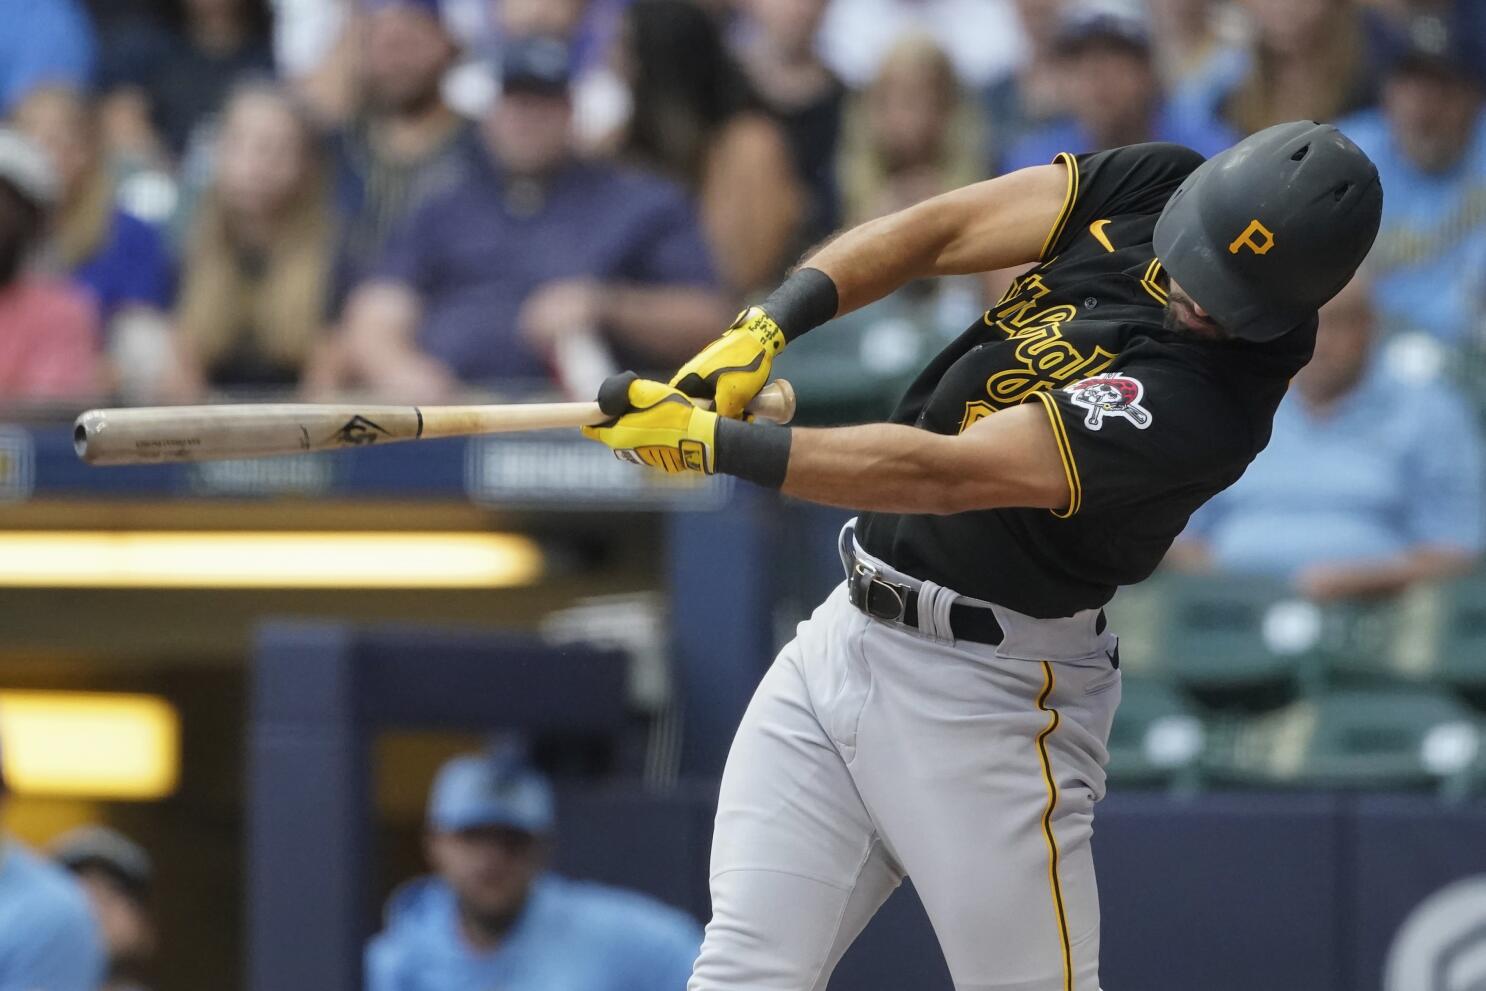 Choi, Reynolds, Santana homer to lead the Pirates to a 3-2 win over the  Padres - The San Diego Union-Tribune